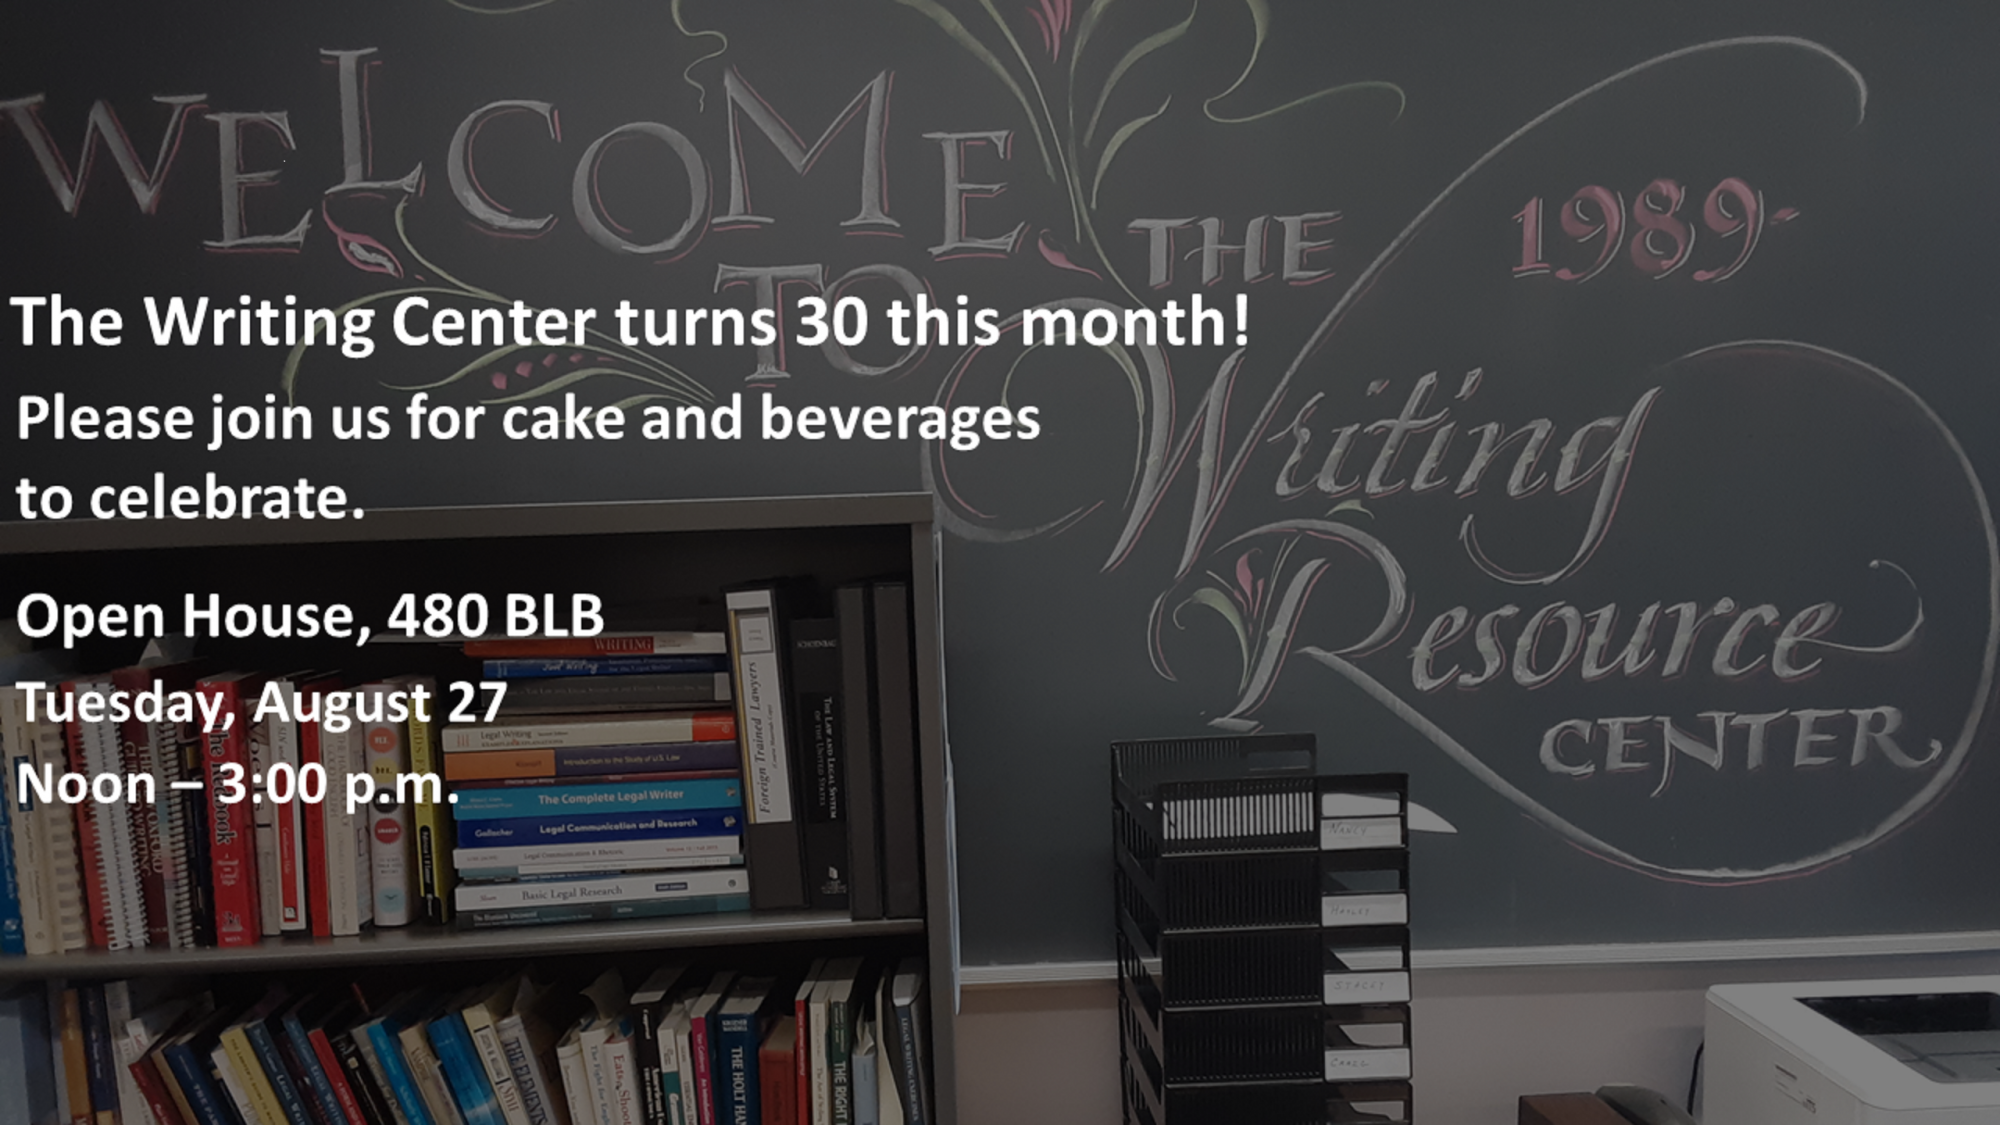    The Writing Center turns 30 this month!     Please join us for cake and beverages to celebrate.          Open House, 480 BLB     Tuesday, August 27     Noon - 3:00 p.m